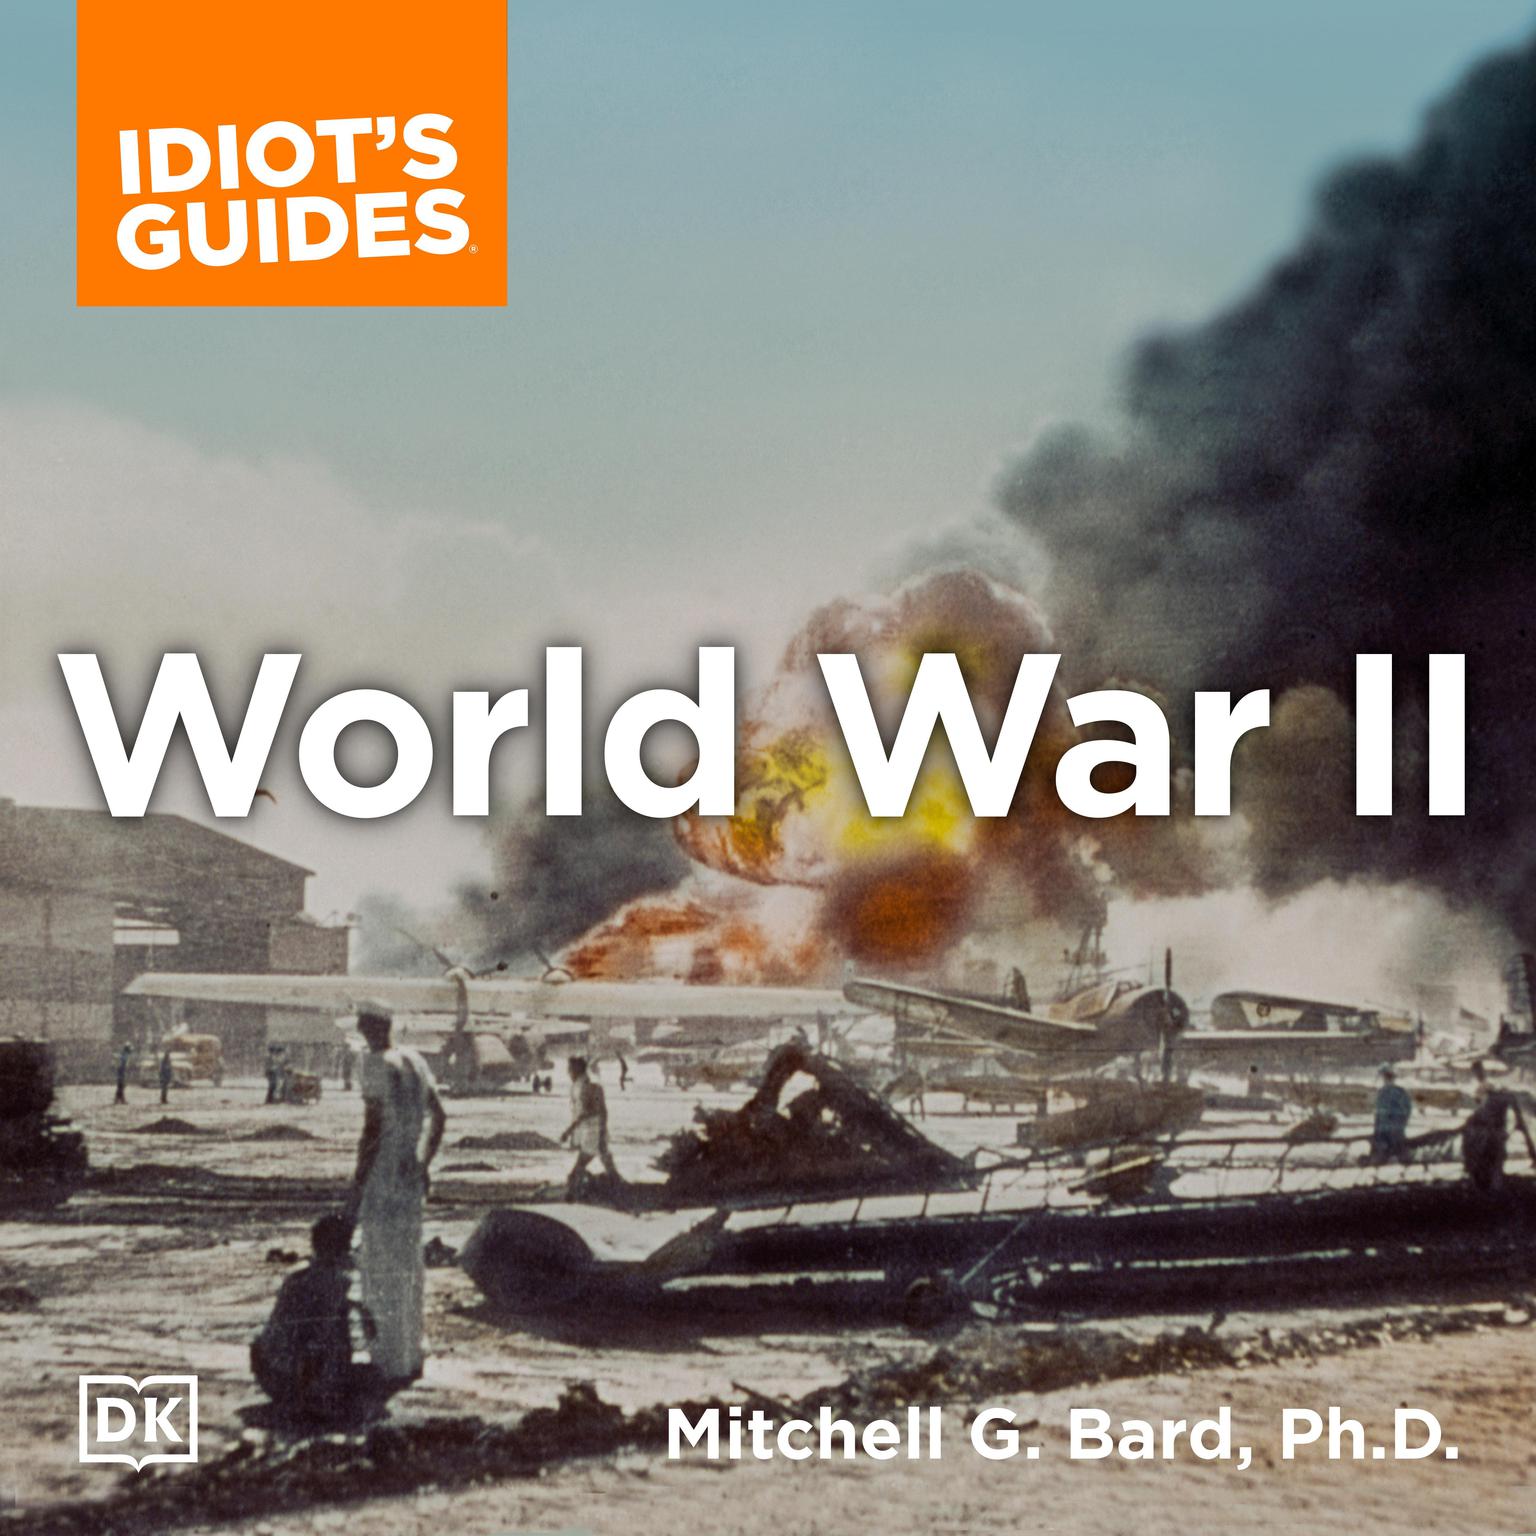 The Complete Idiots Guide to World War II, 3rd Edition: Get the Big Picture on the War That Changed the World Audiobook, by Mitchell G. Bard Ph.D.